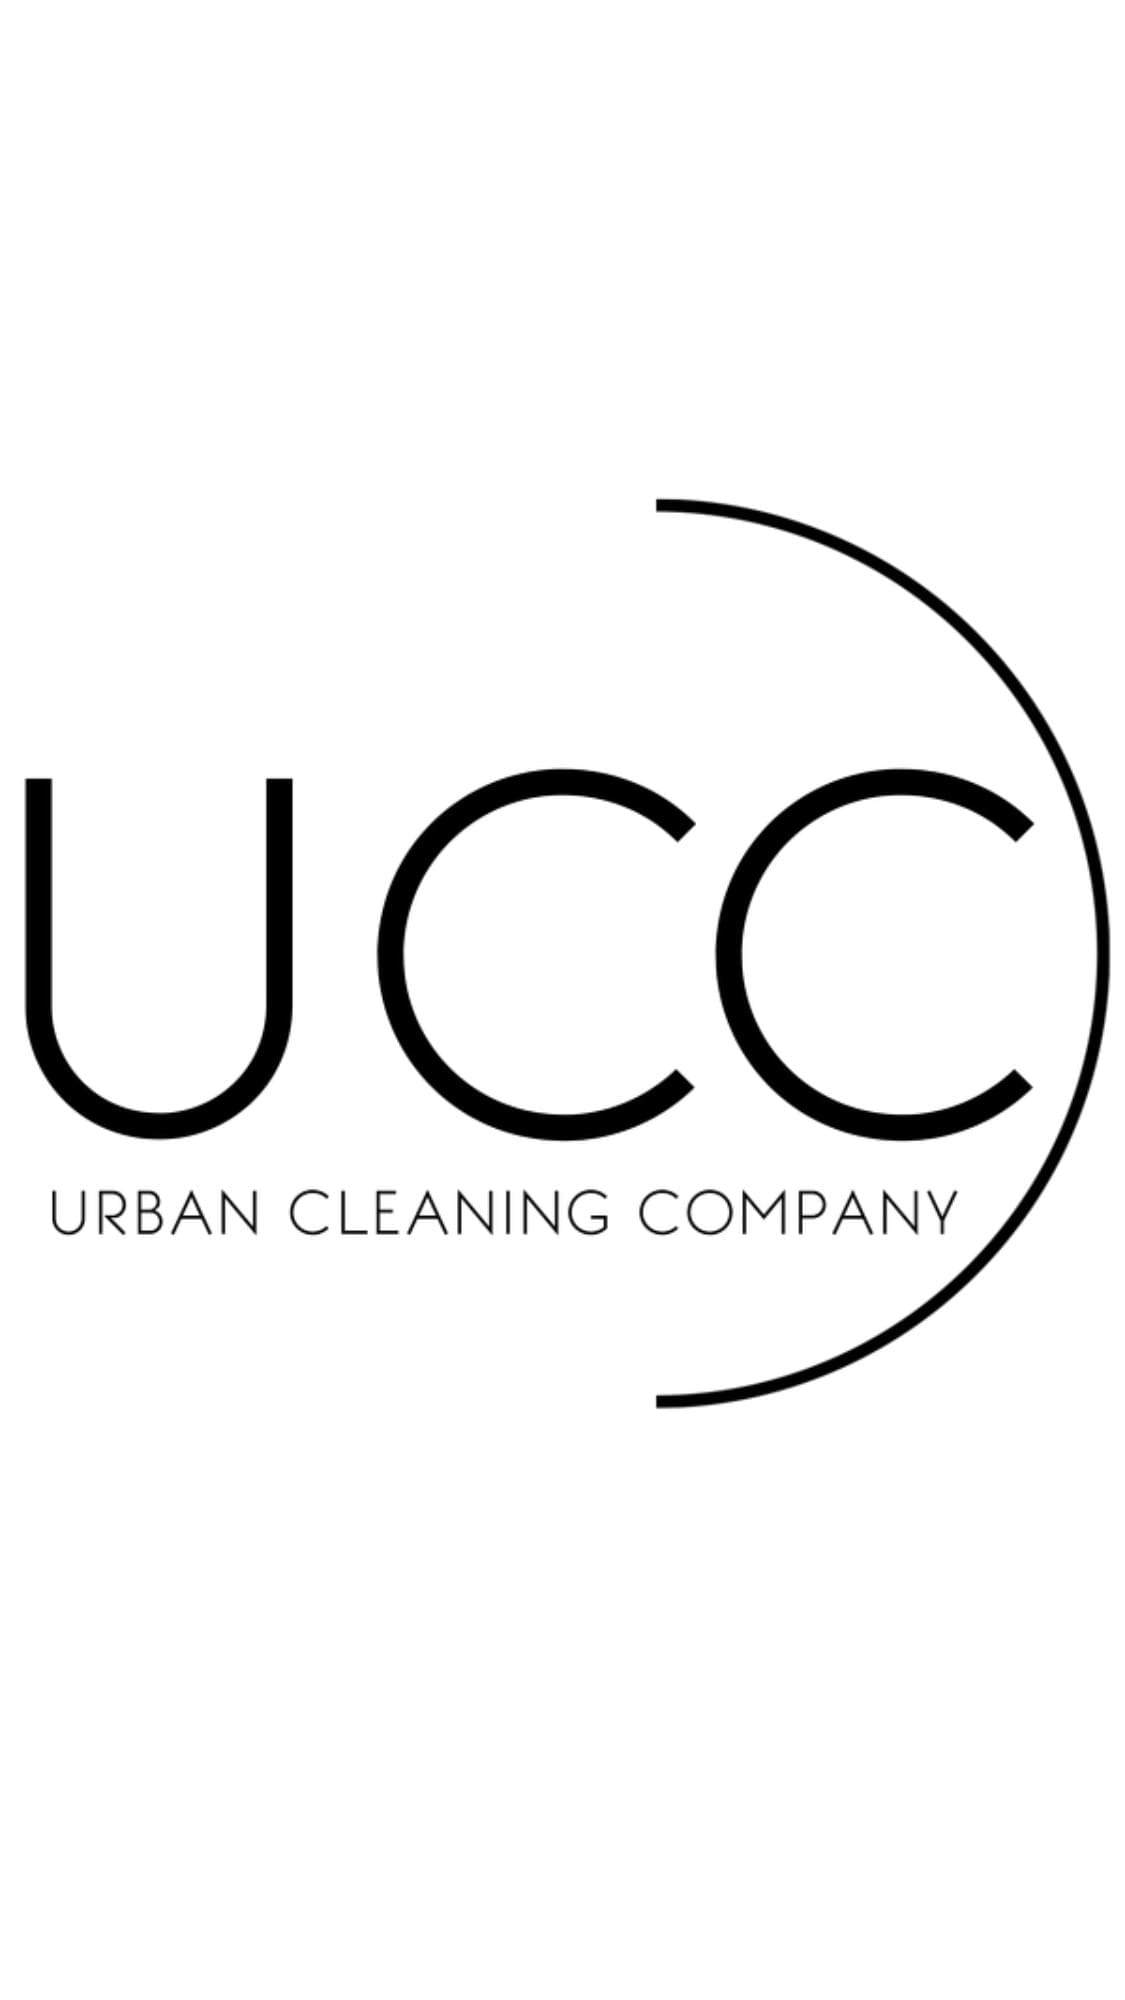 Urban Cleaning Company